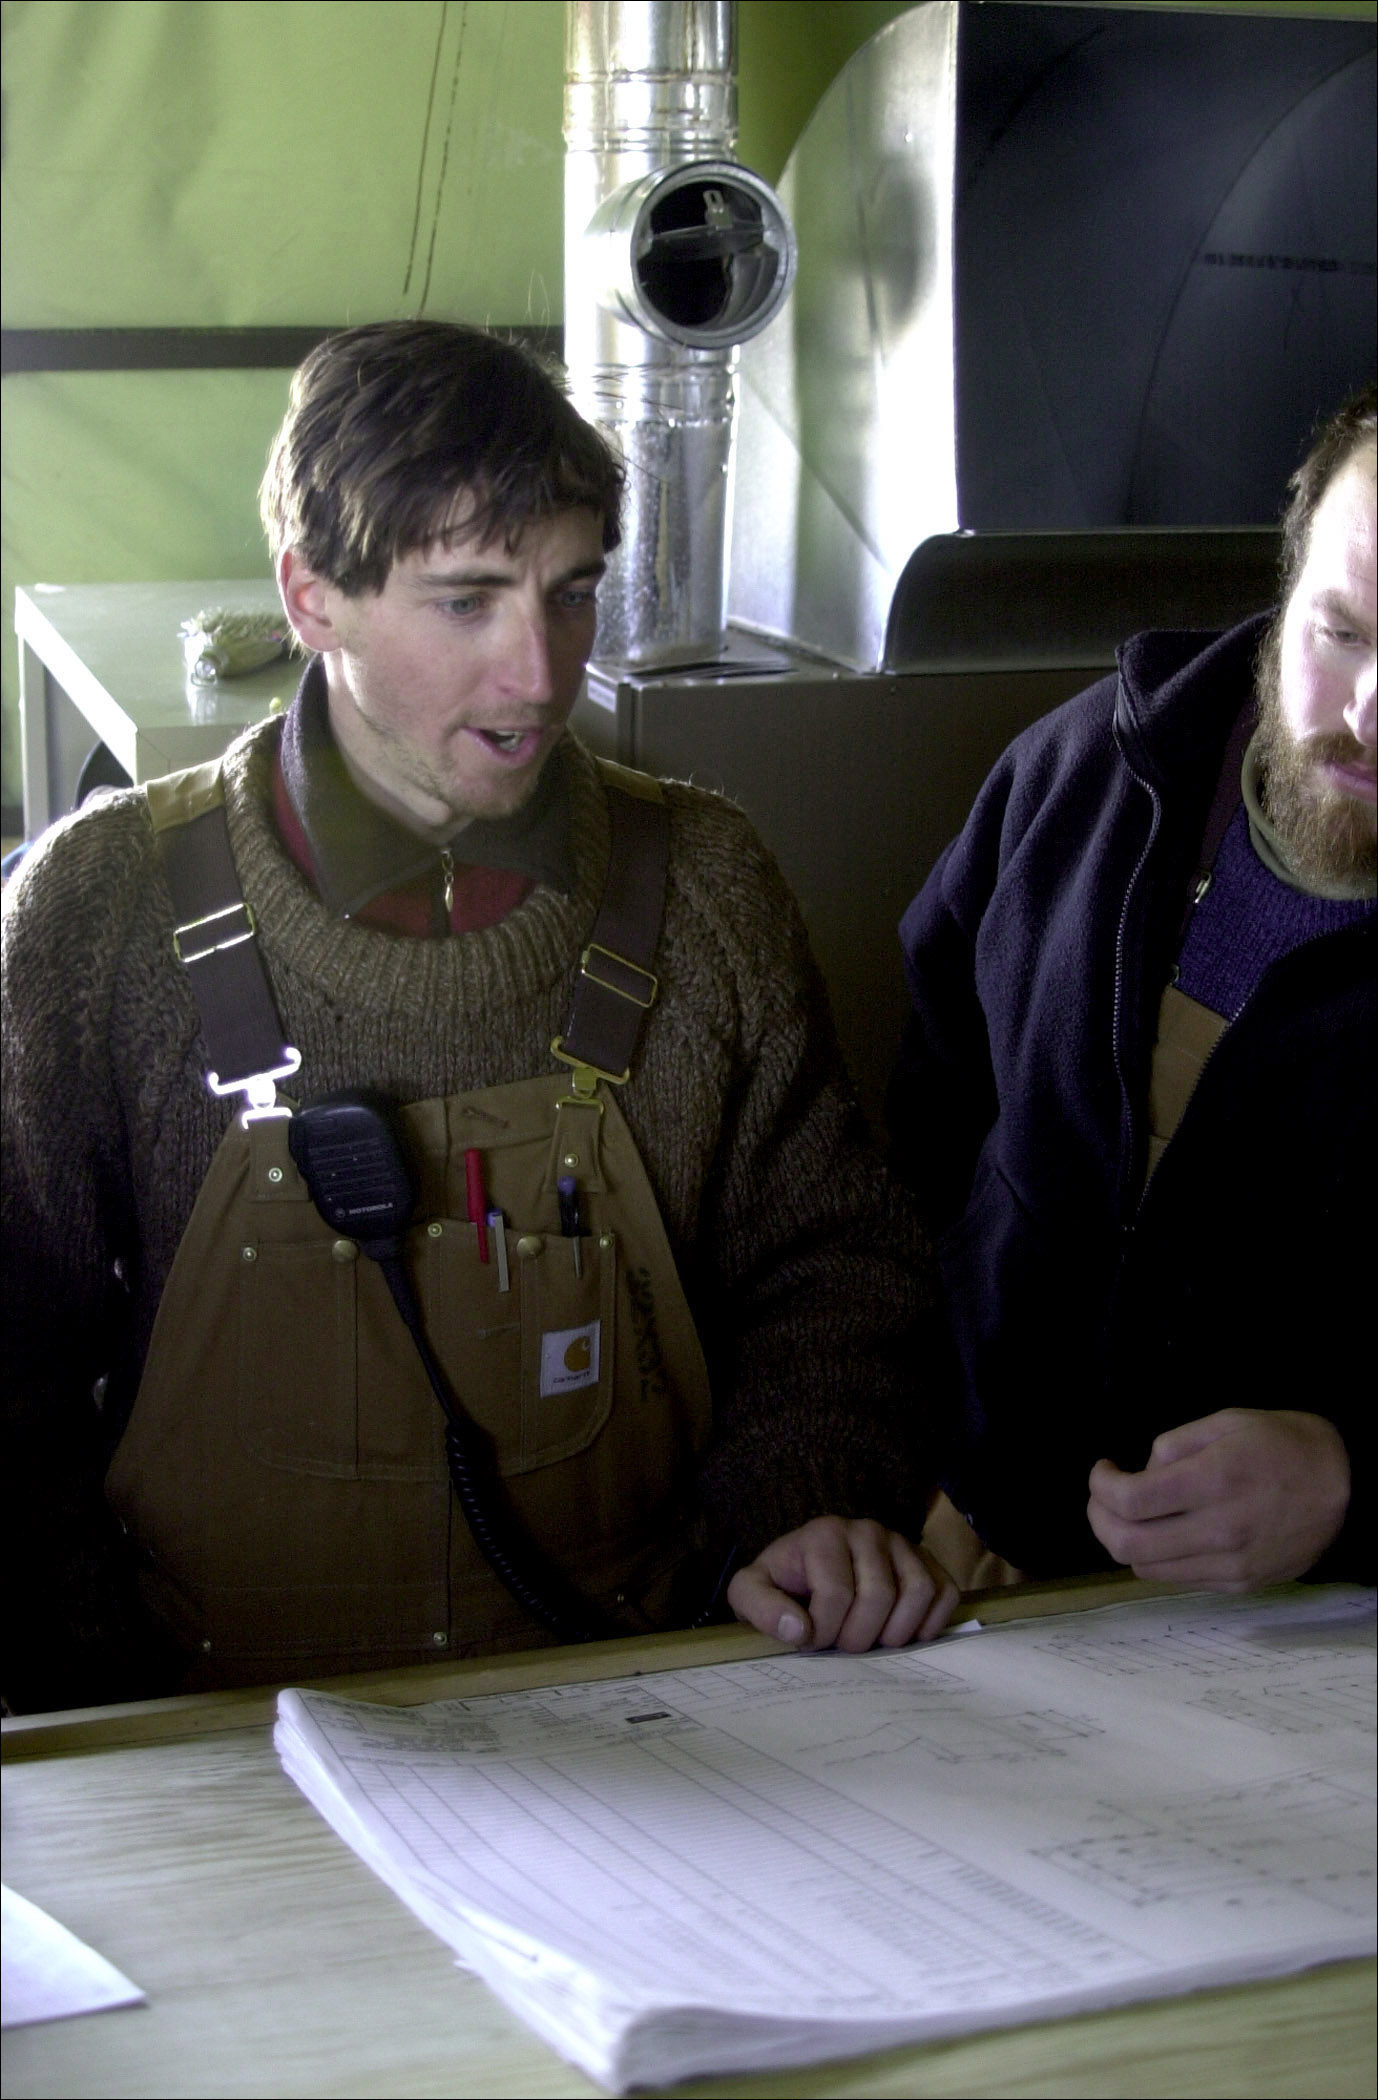 Two men sit at a table inside a hut, discussing the construction plans on the table.